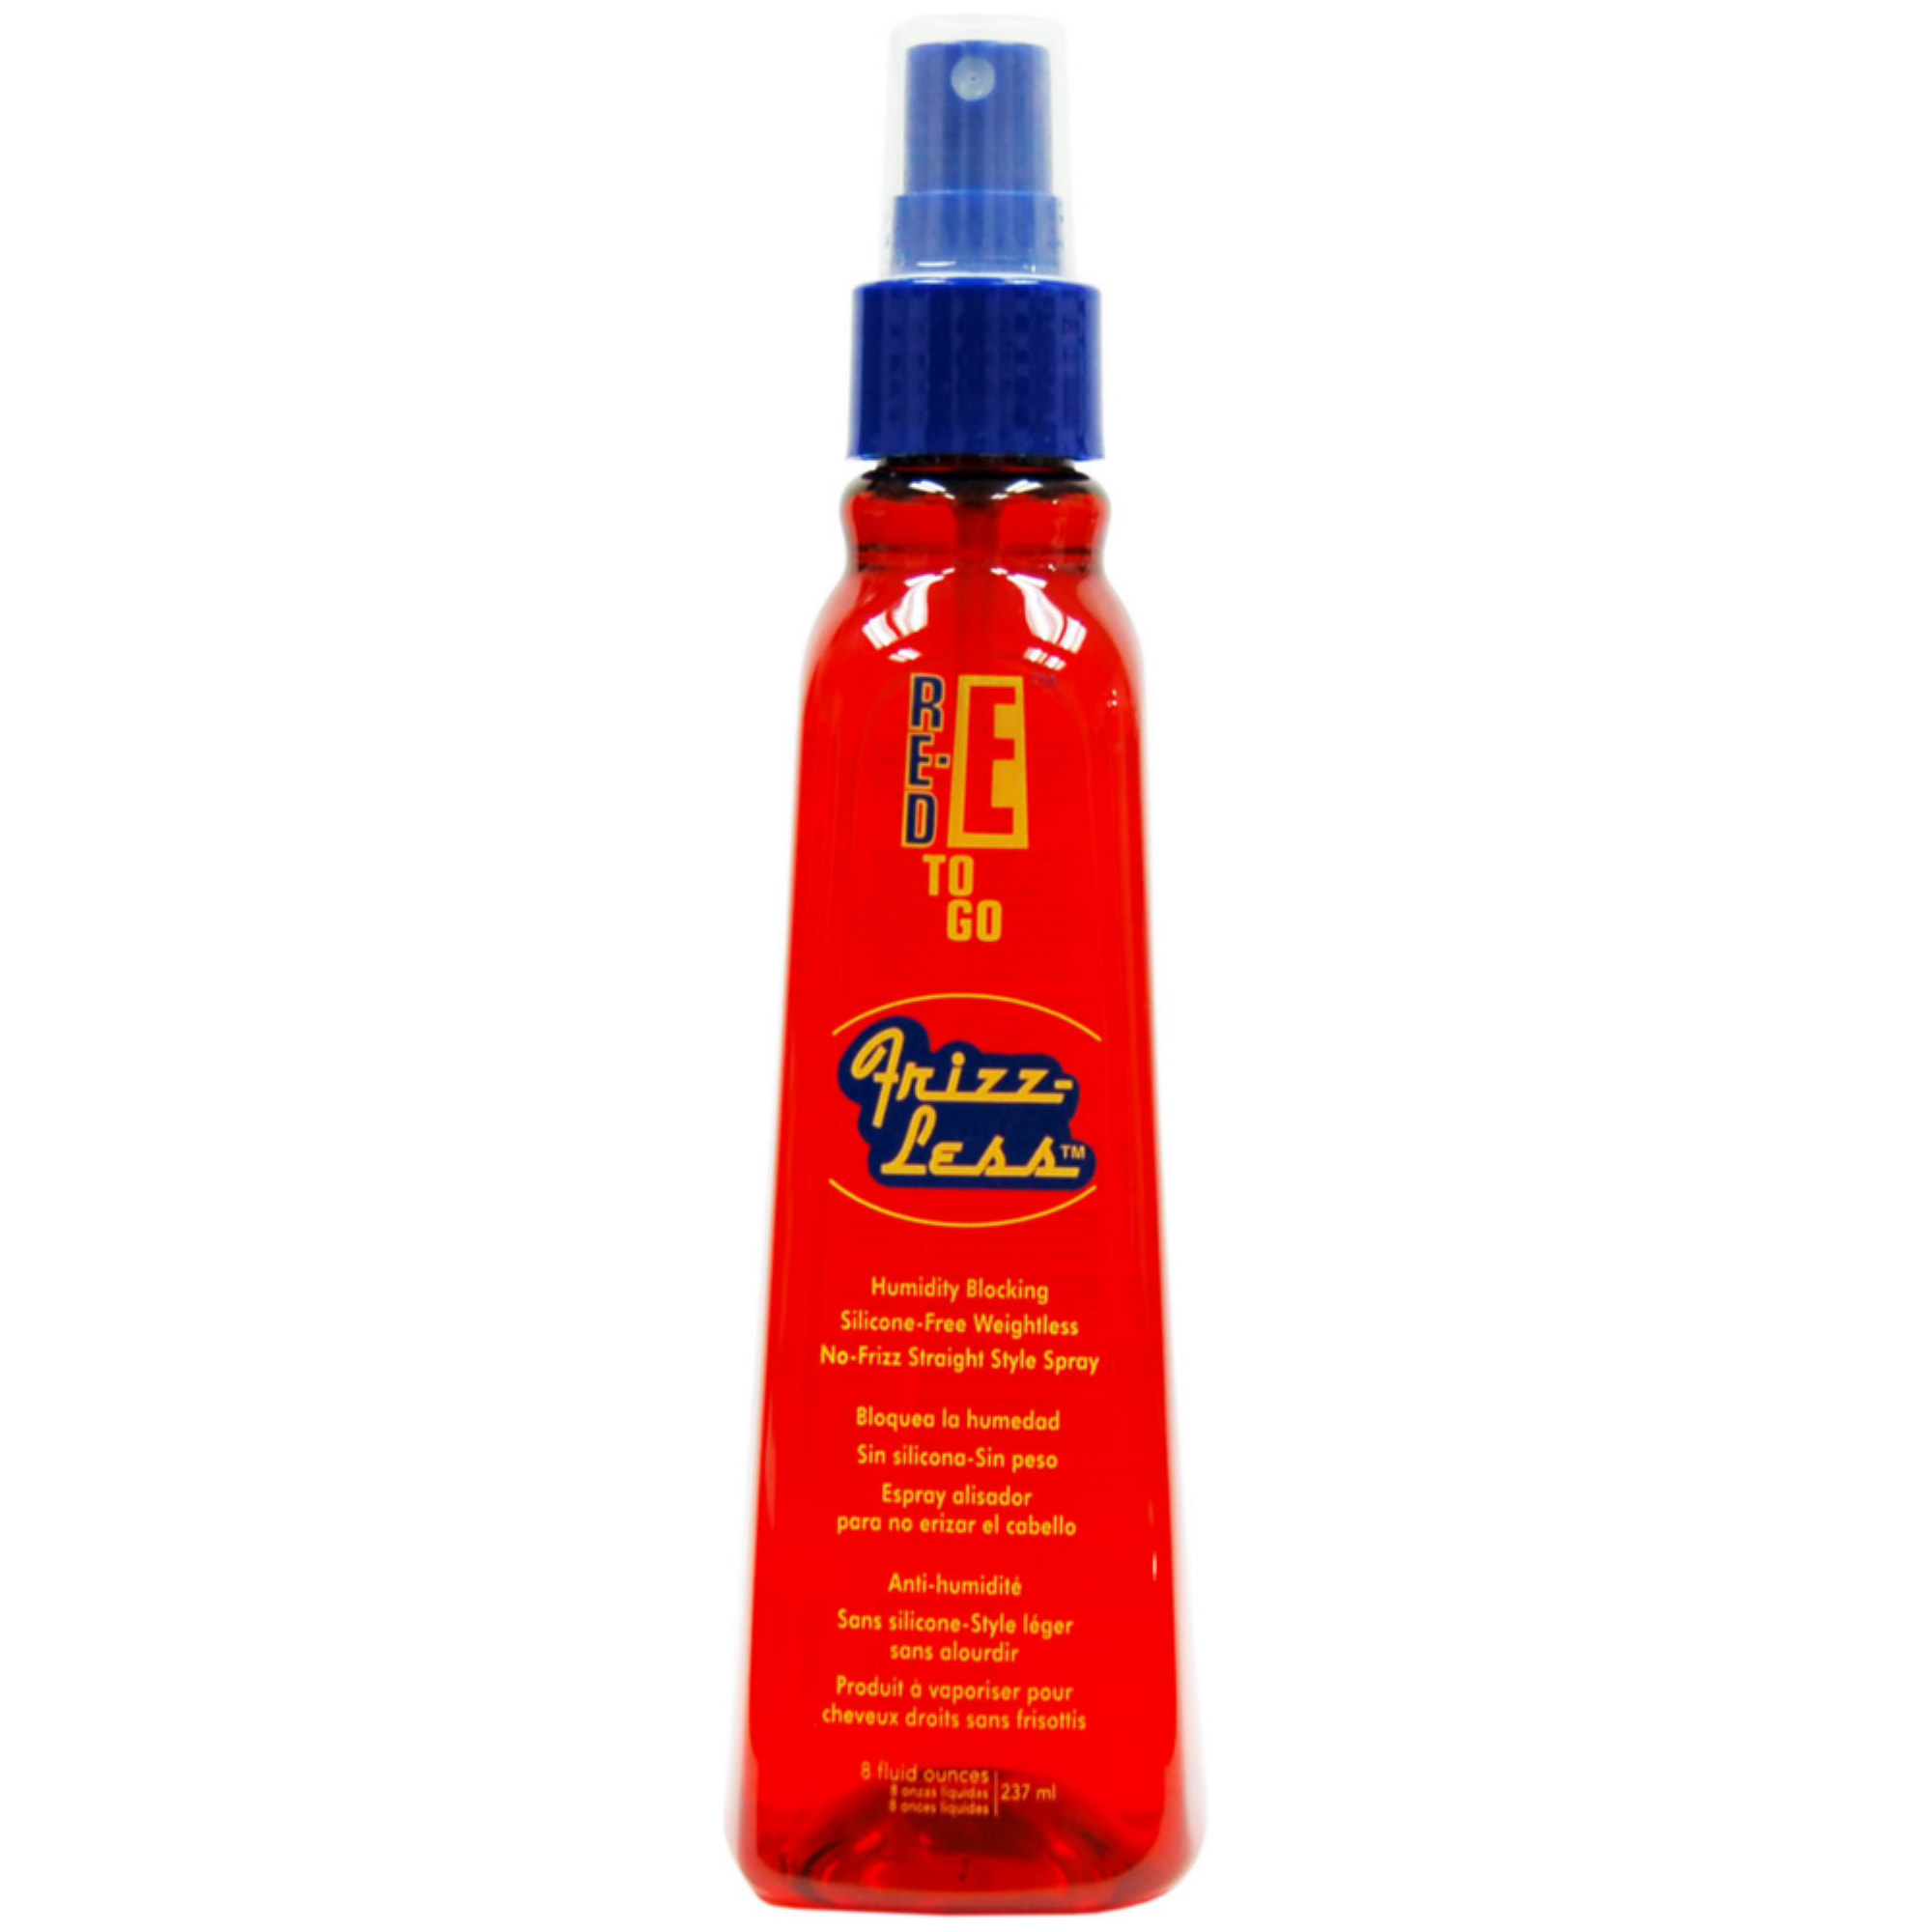 RED-E TO GO FRIZZLESS 8OZ or Travel Size